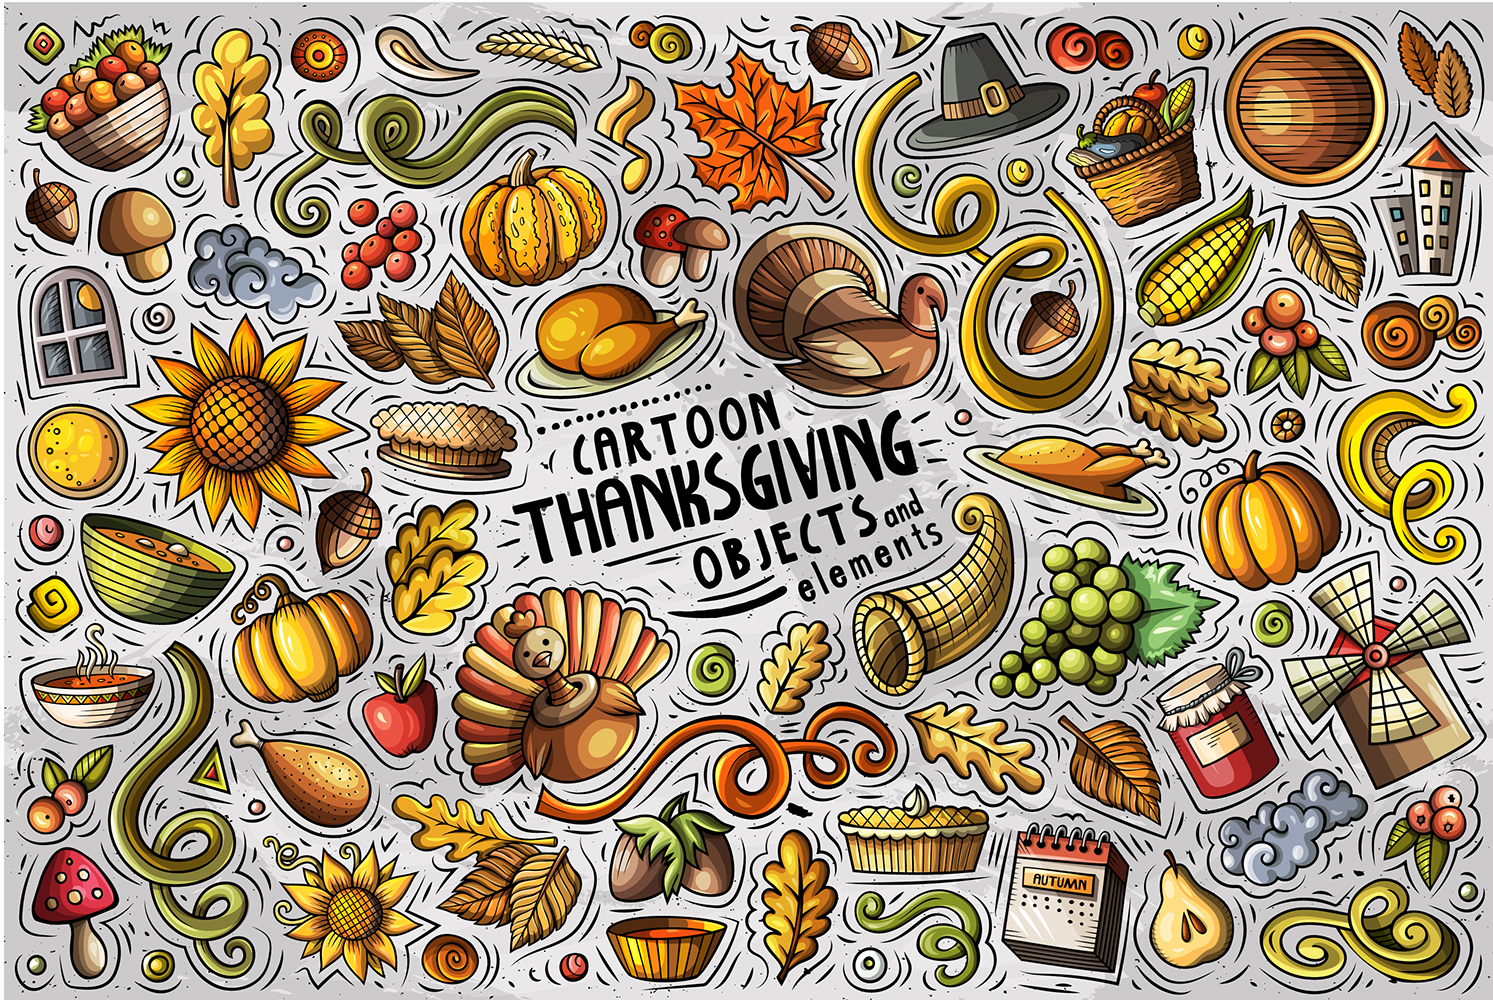 Thanksgiving Cartoon Doodle Objects Set - Vector Image